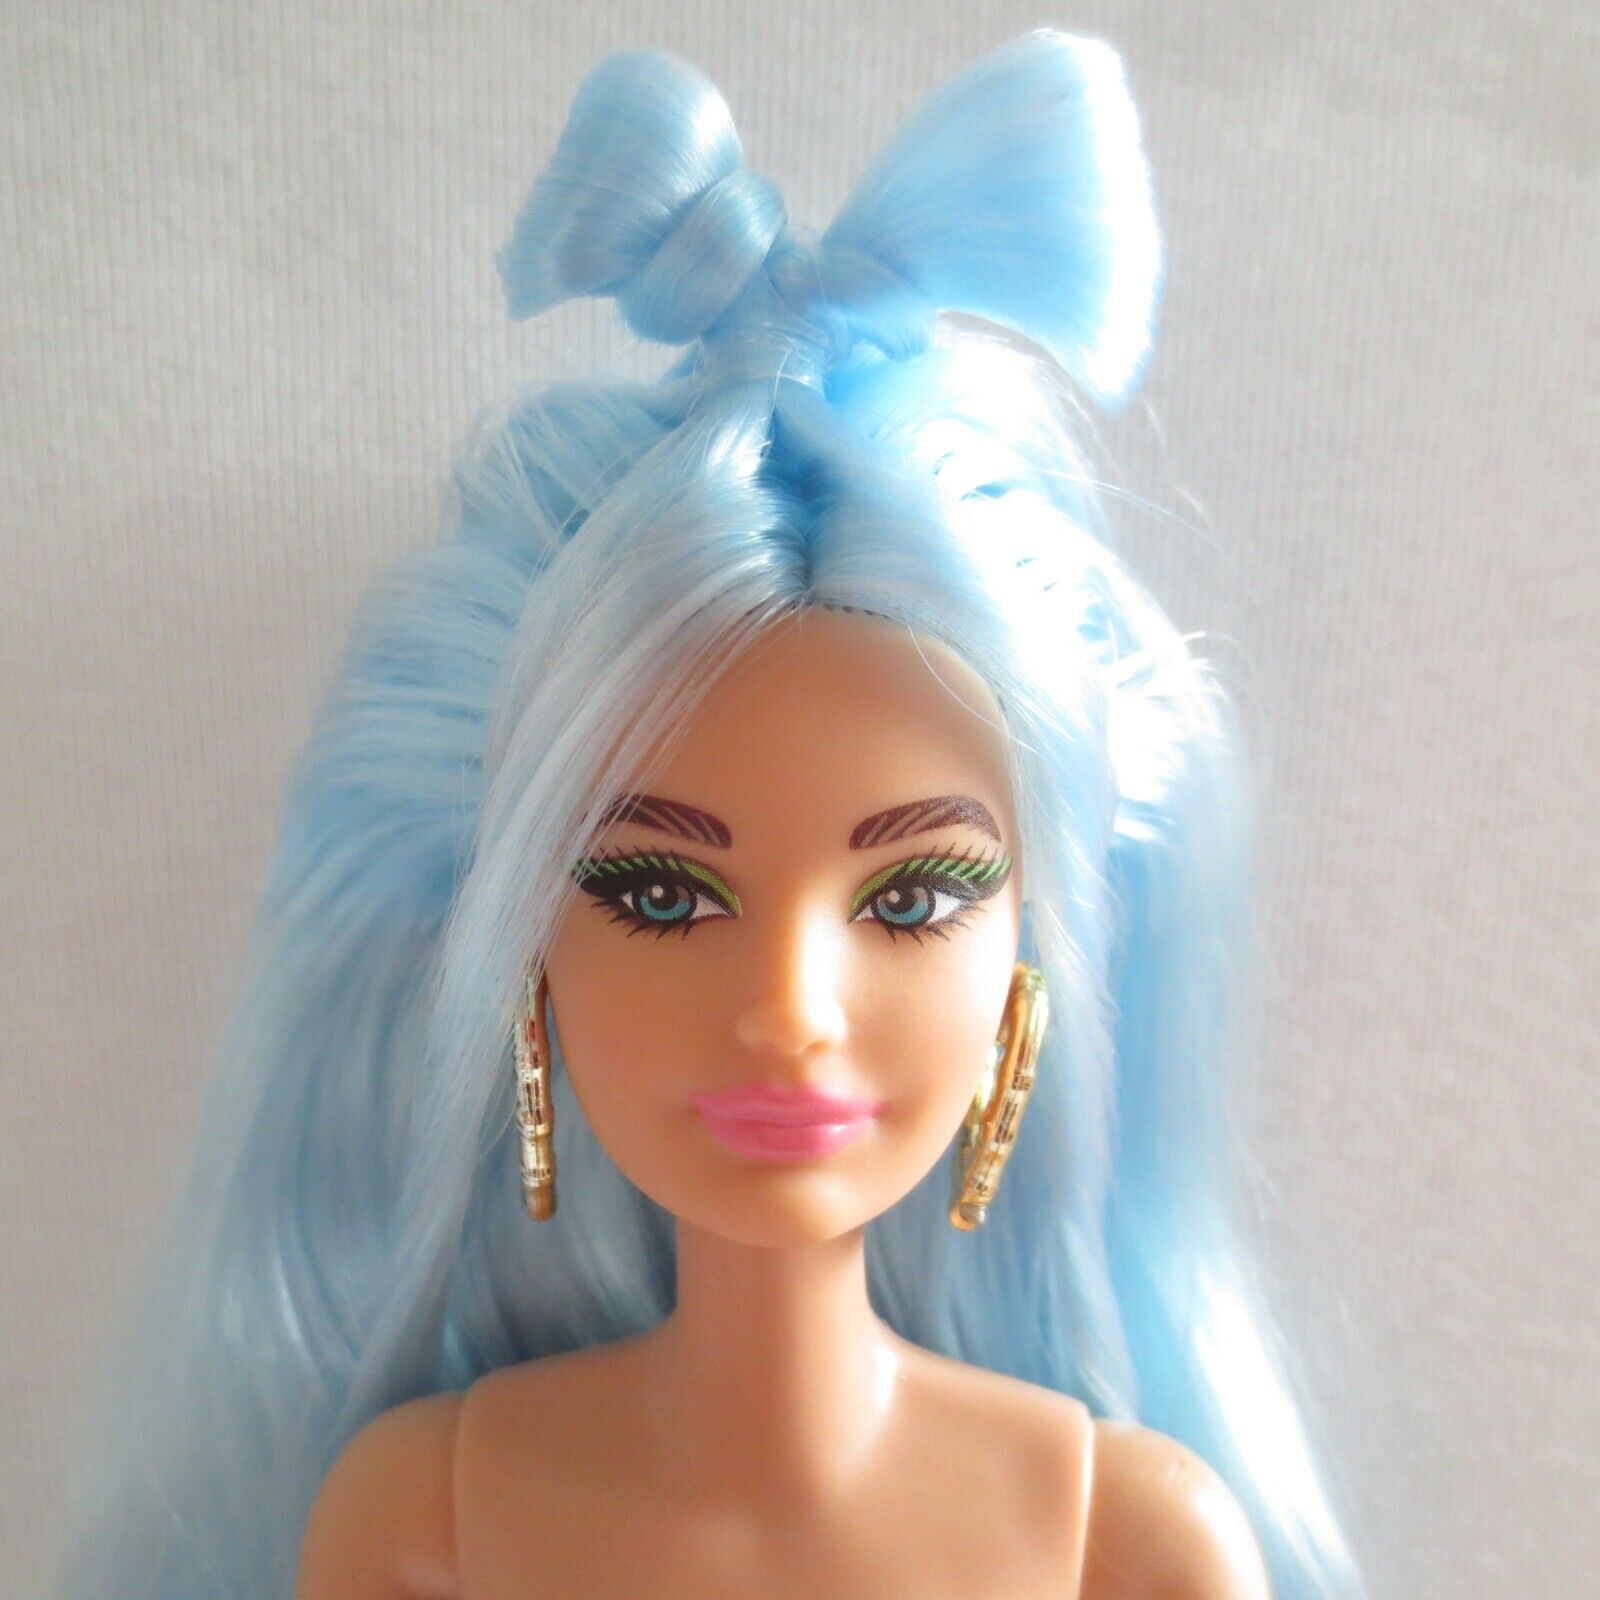 NEW 2021 Barbie Extra Deluxe Doll Blue Bow Hair Skipper Face ~ Articulated NUDE